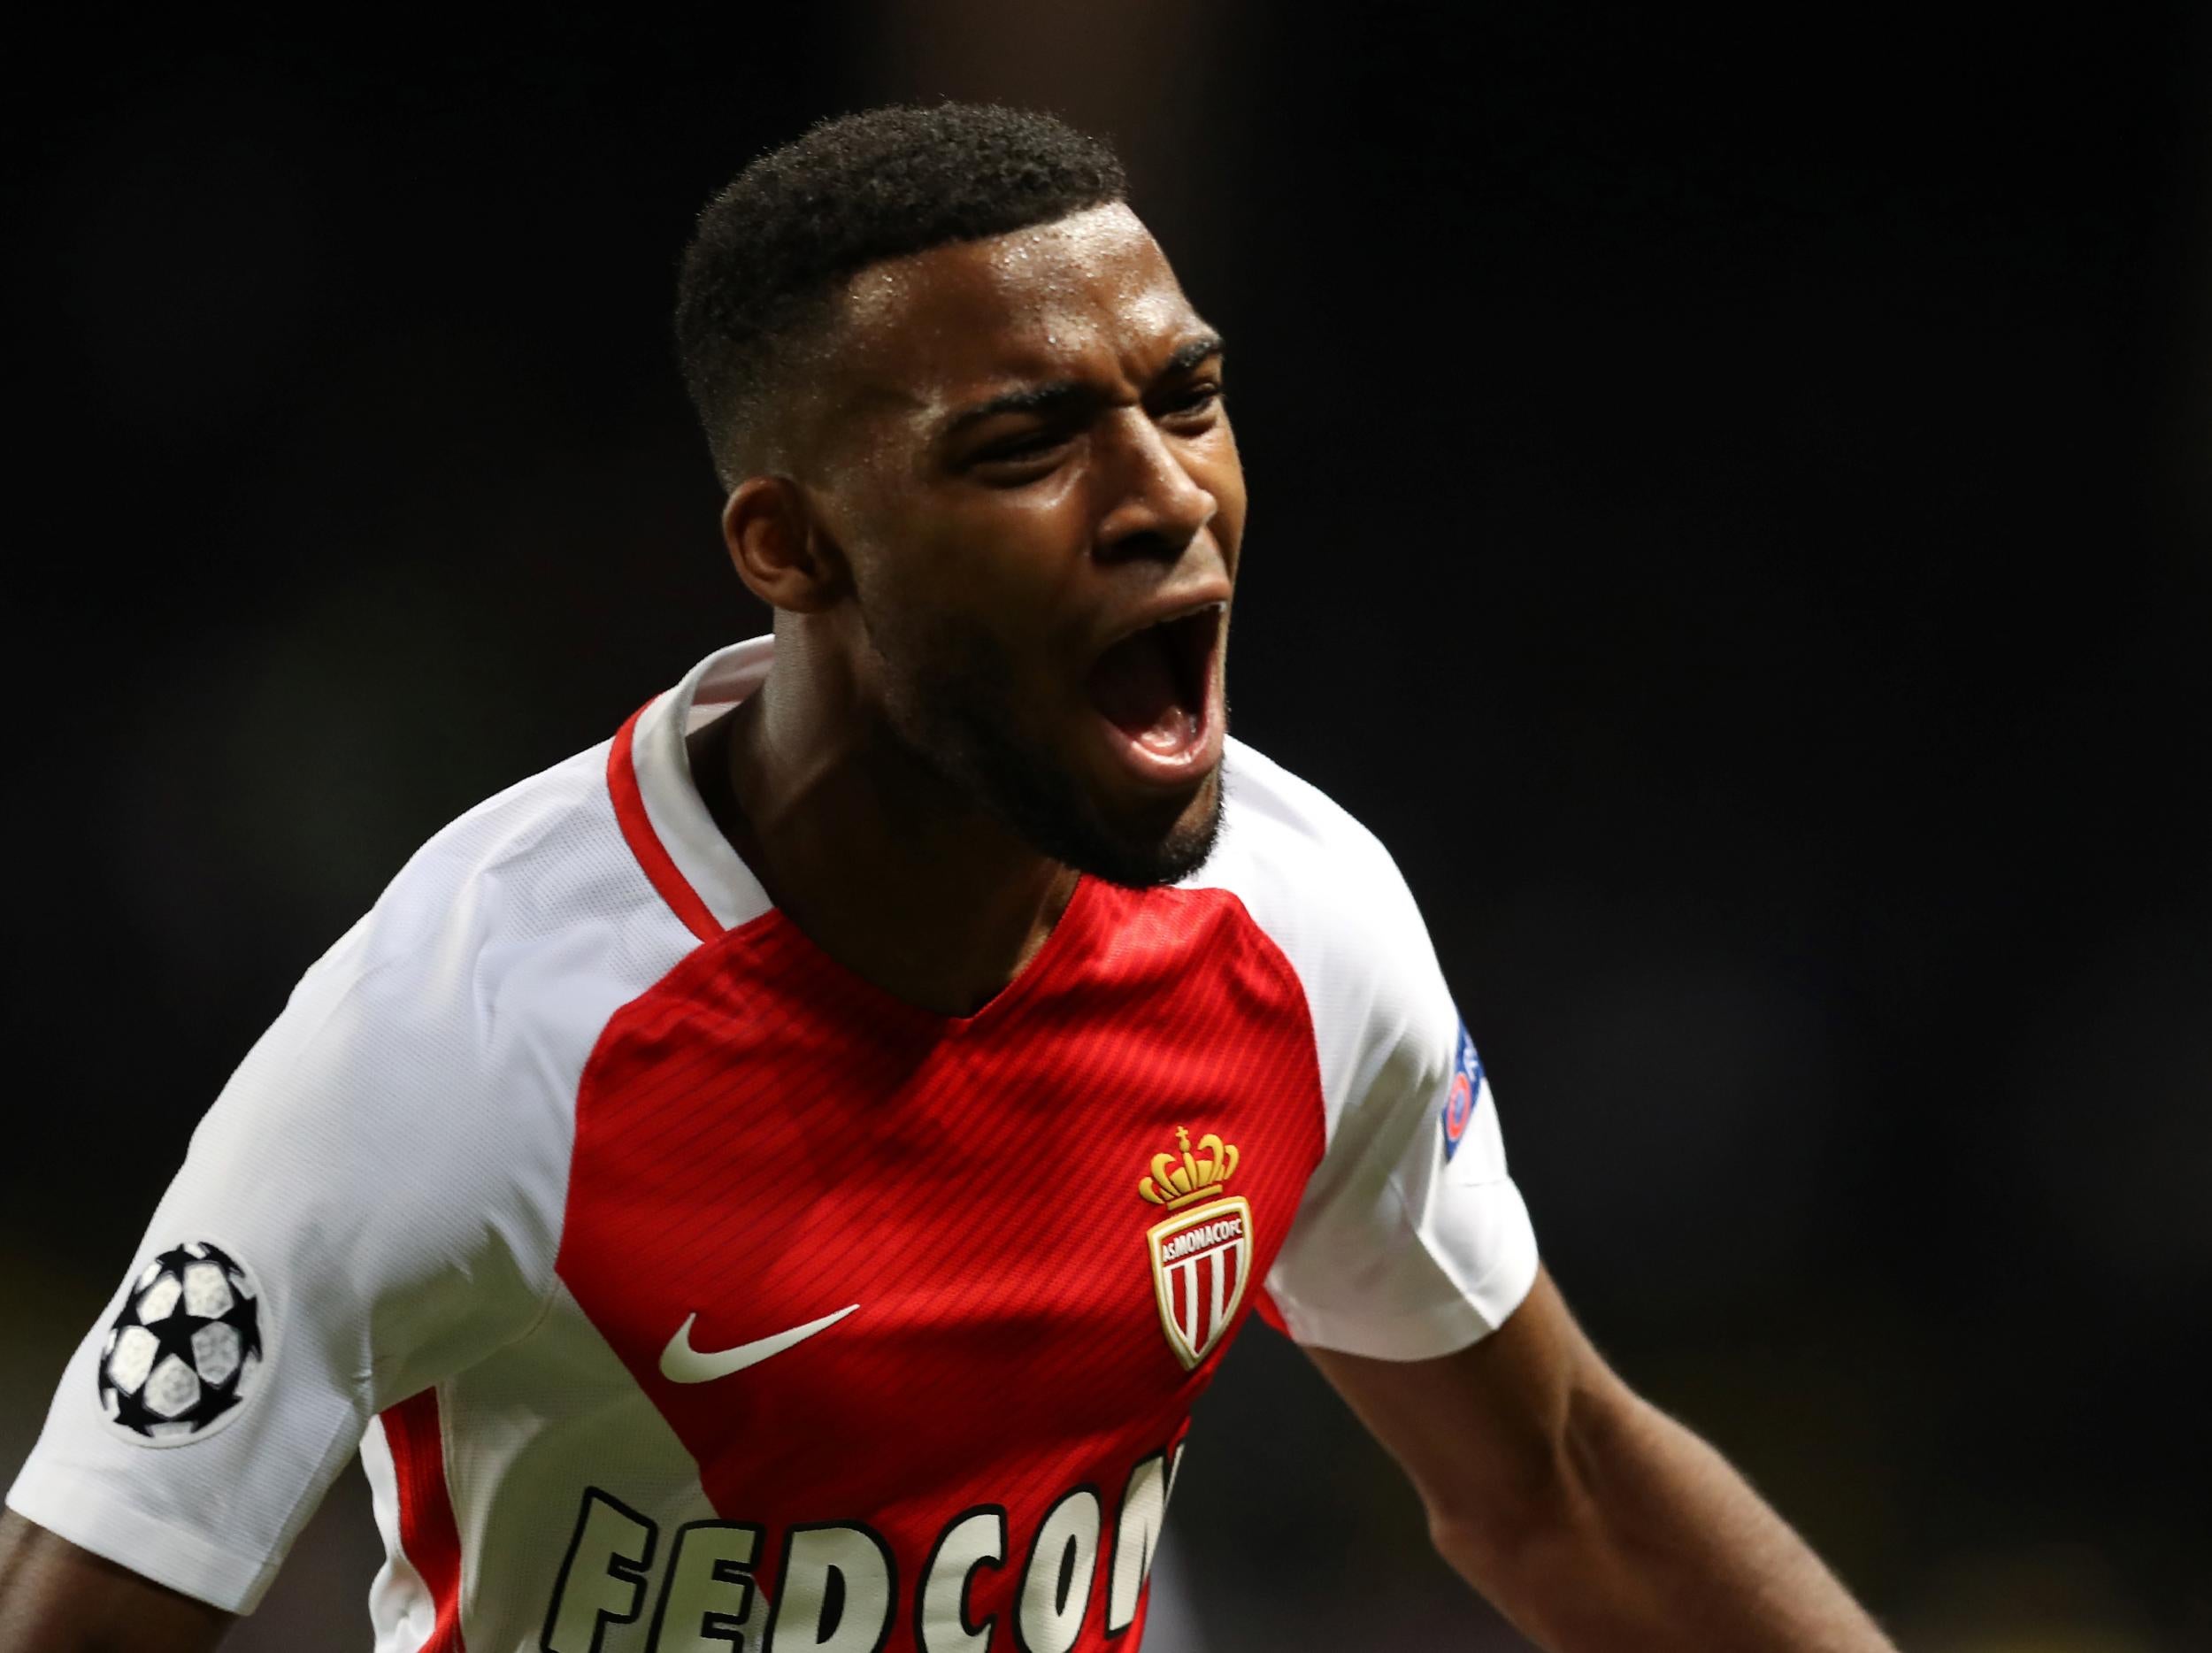 Transfer news live: Liverpool and Arsenal to battle for Thomas Lemar, United keen on Gareth Bale, Mesut Ozil to stay